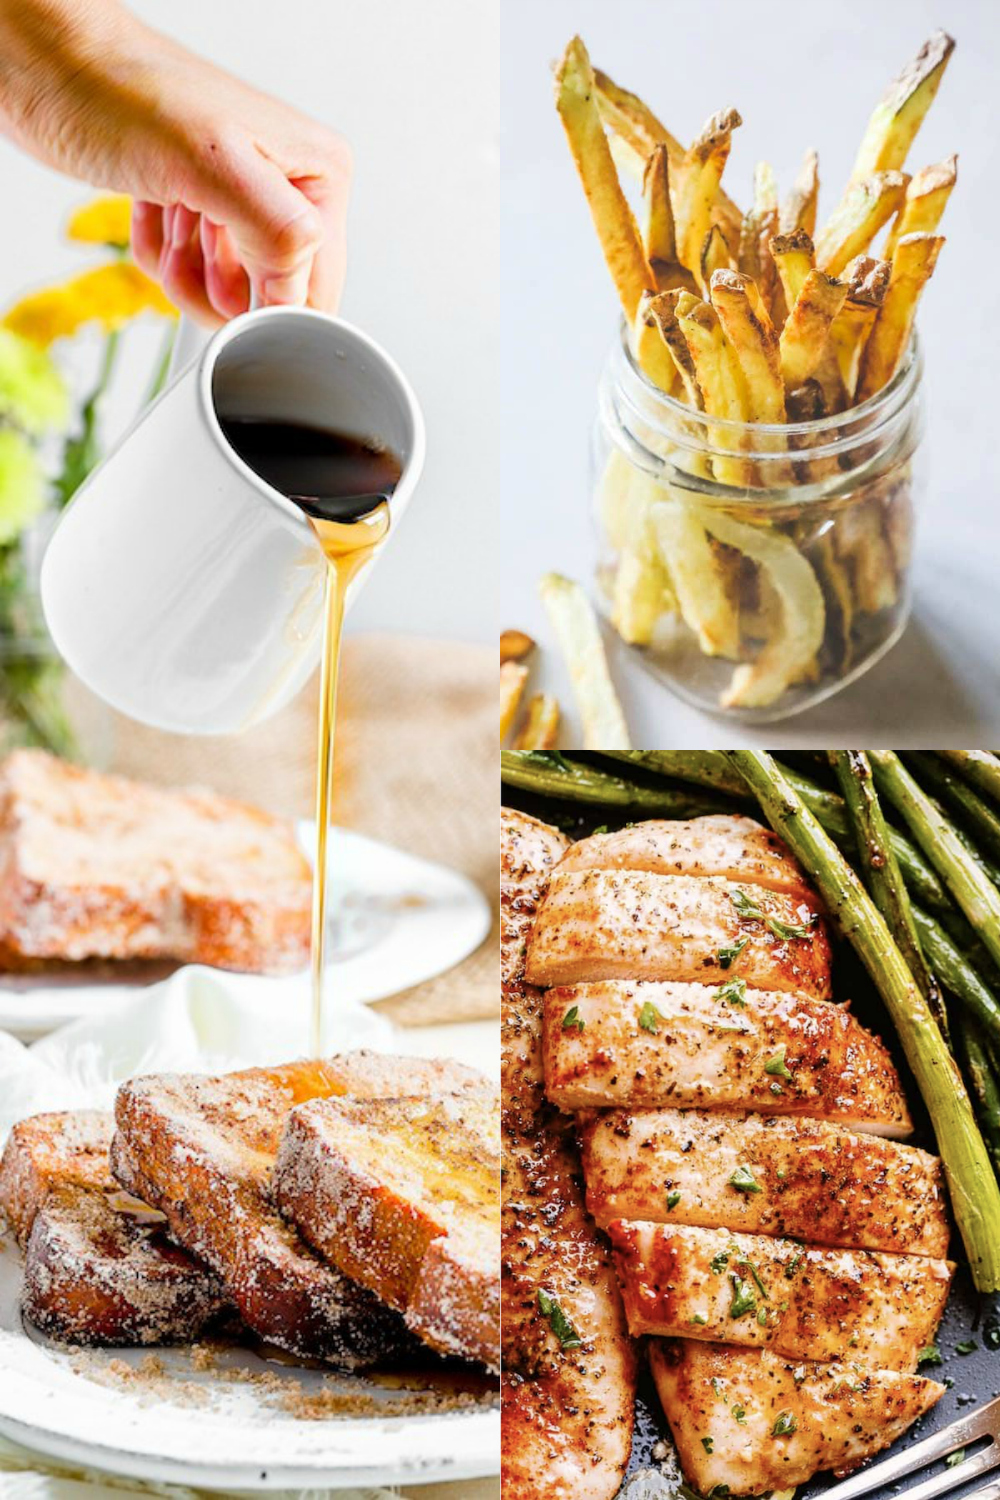 75 Best Air Fryer Recipes for Every Meal